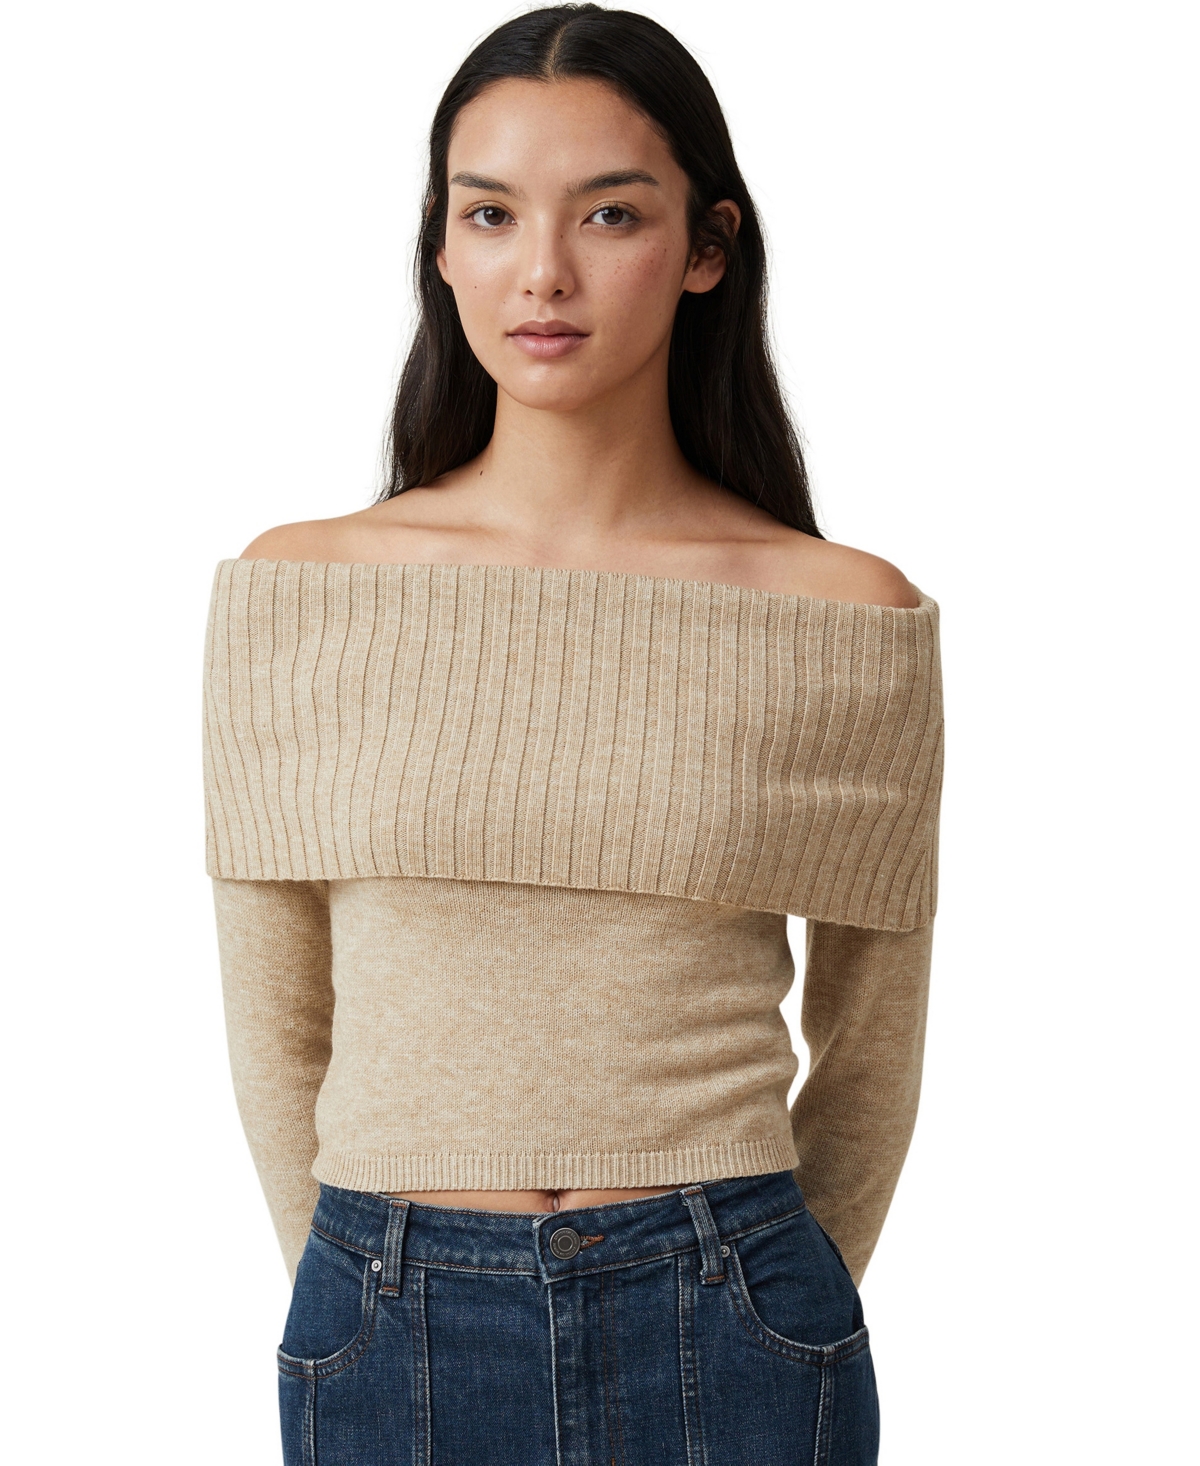 Women's Everfine Off The Shoulder Pullover Sweater - Sand Dune Marle